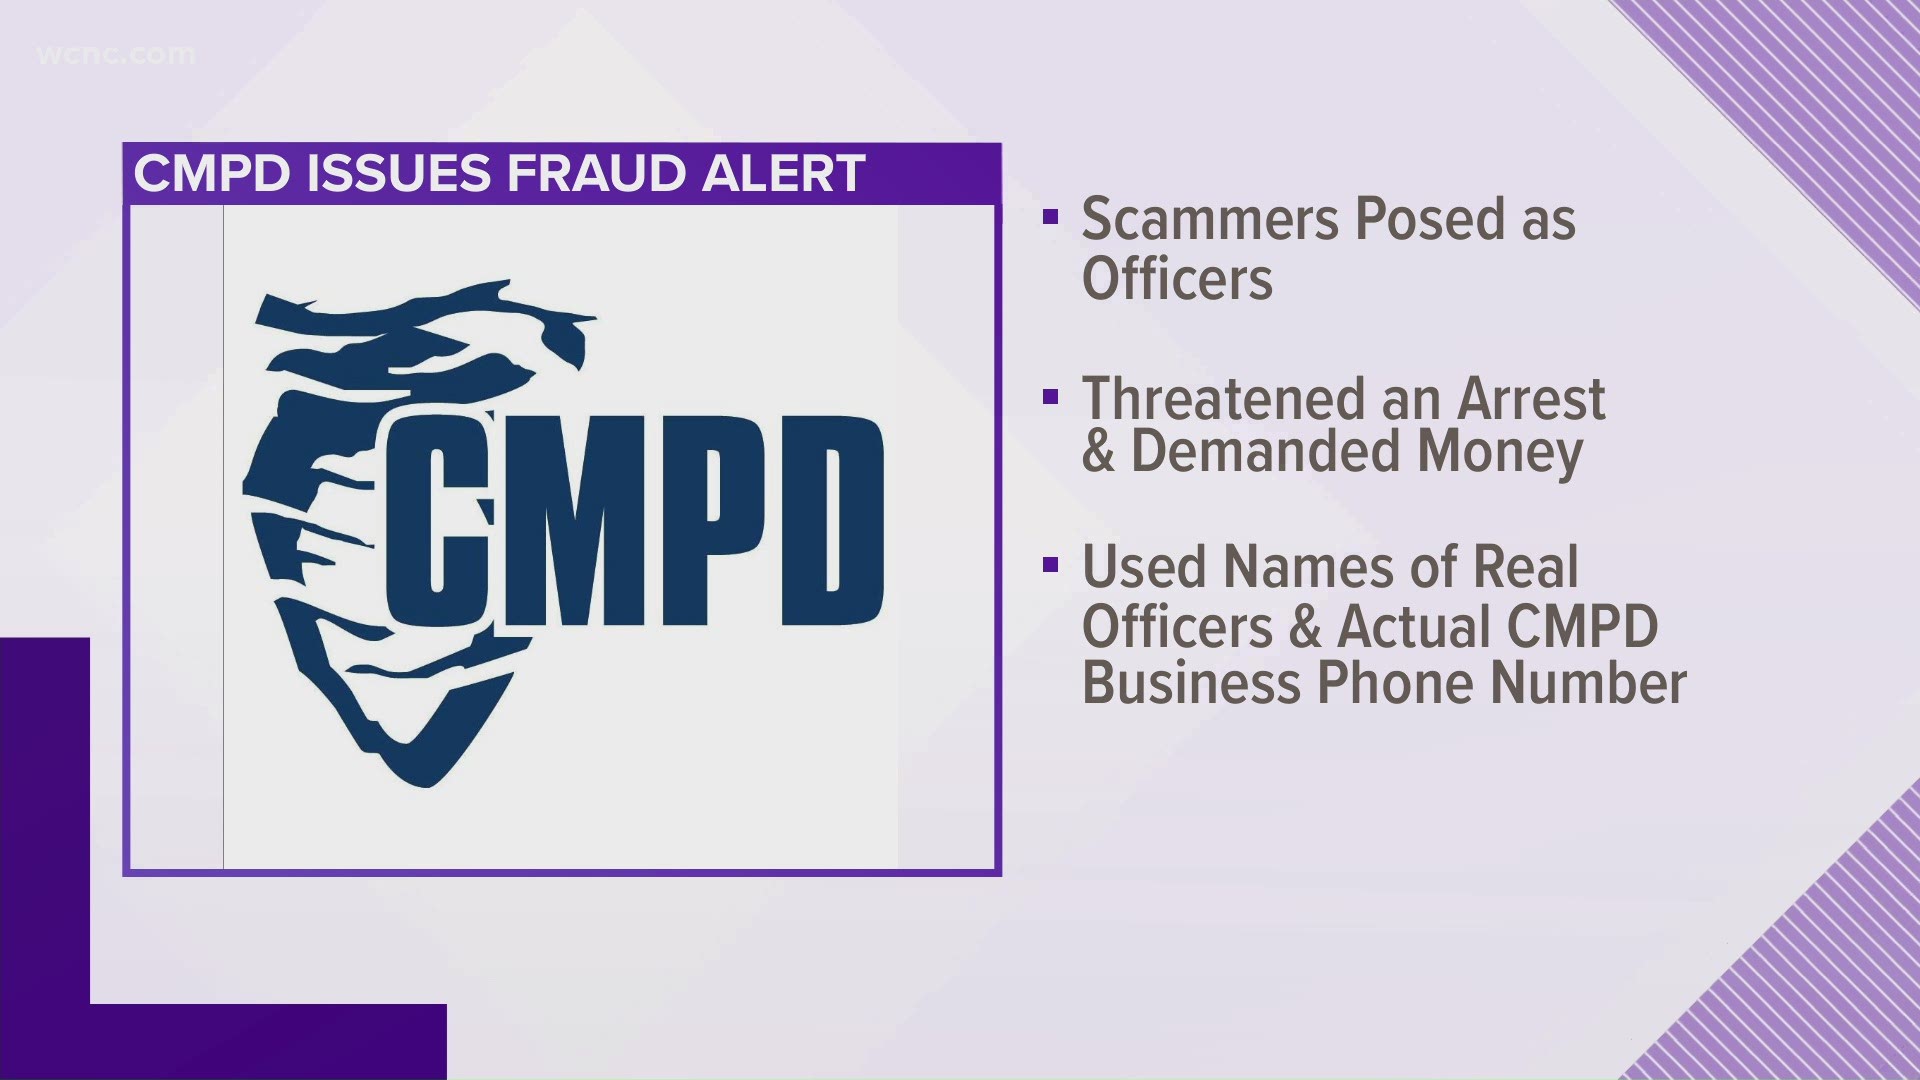 The victim said three people called from a CMPD number and identified themselves as officers. The scammers said if they weren't sent money, they'd arrest the victim.